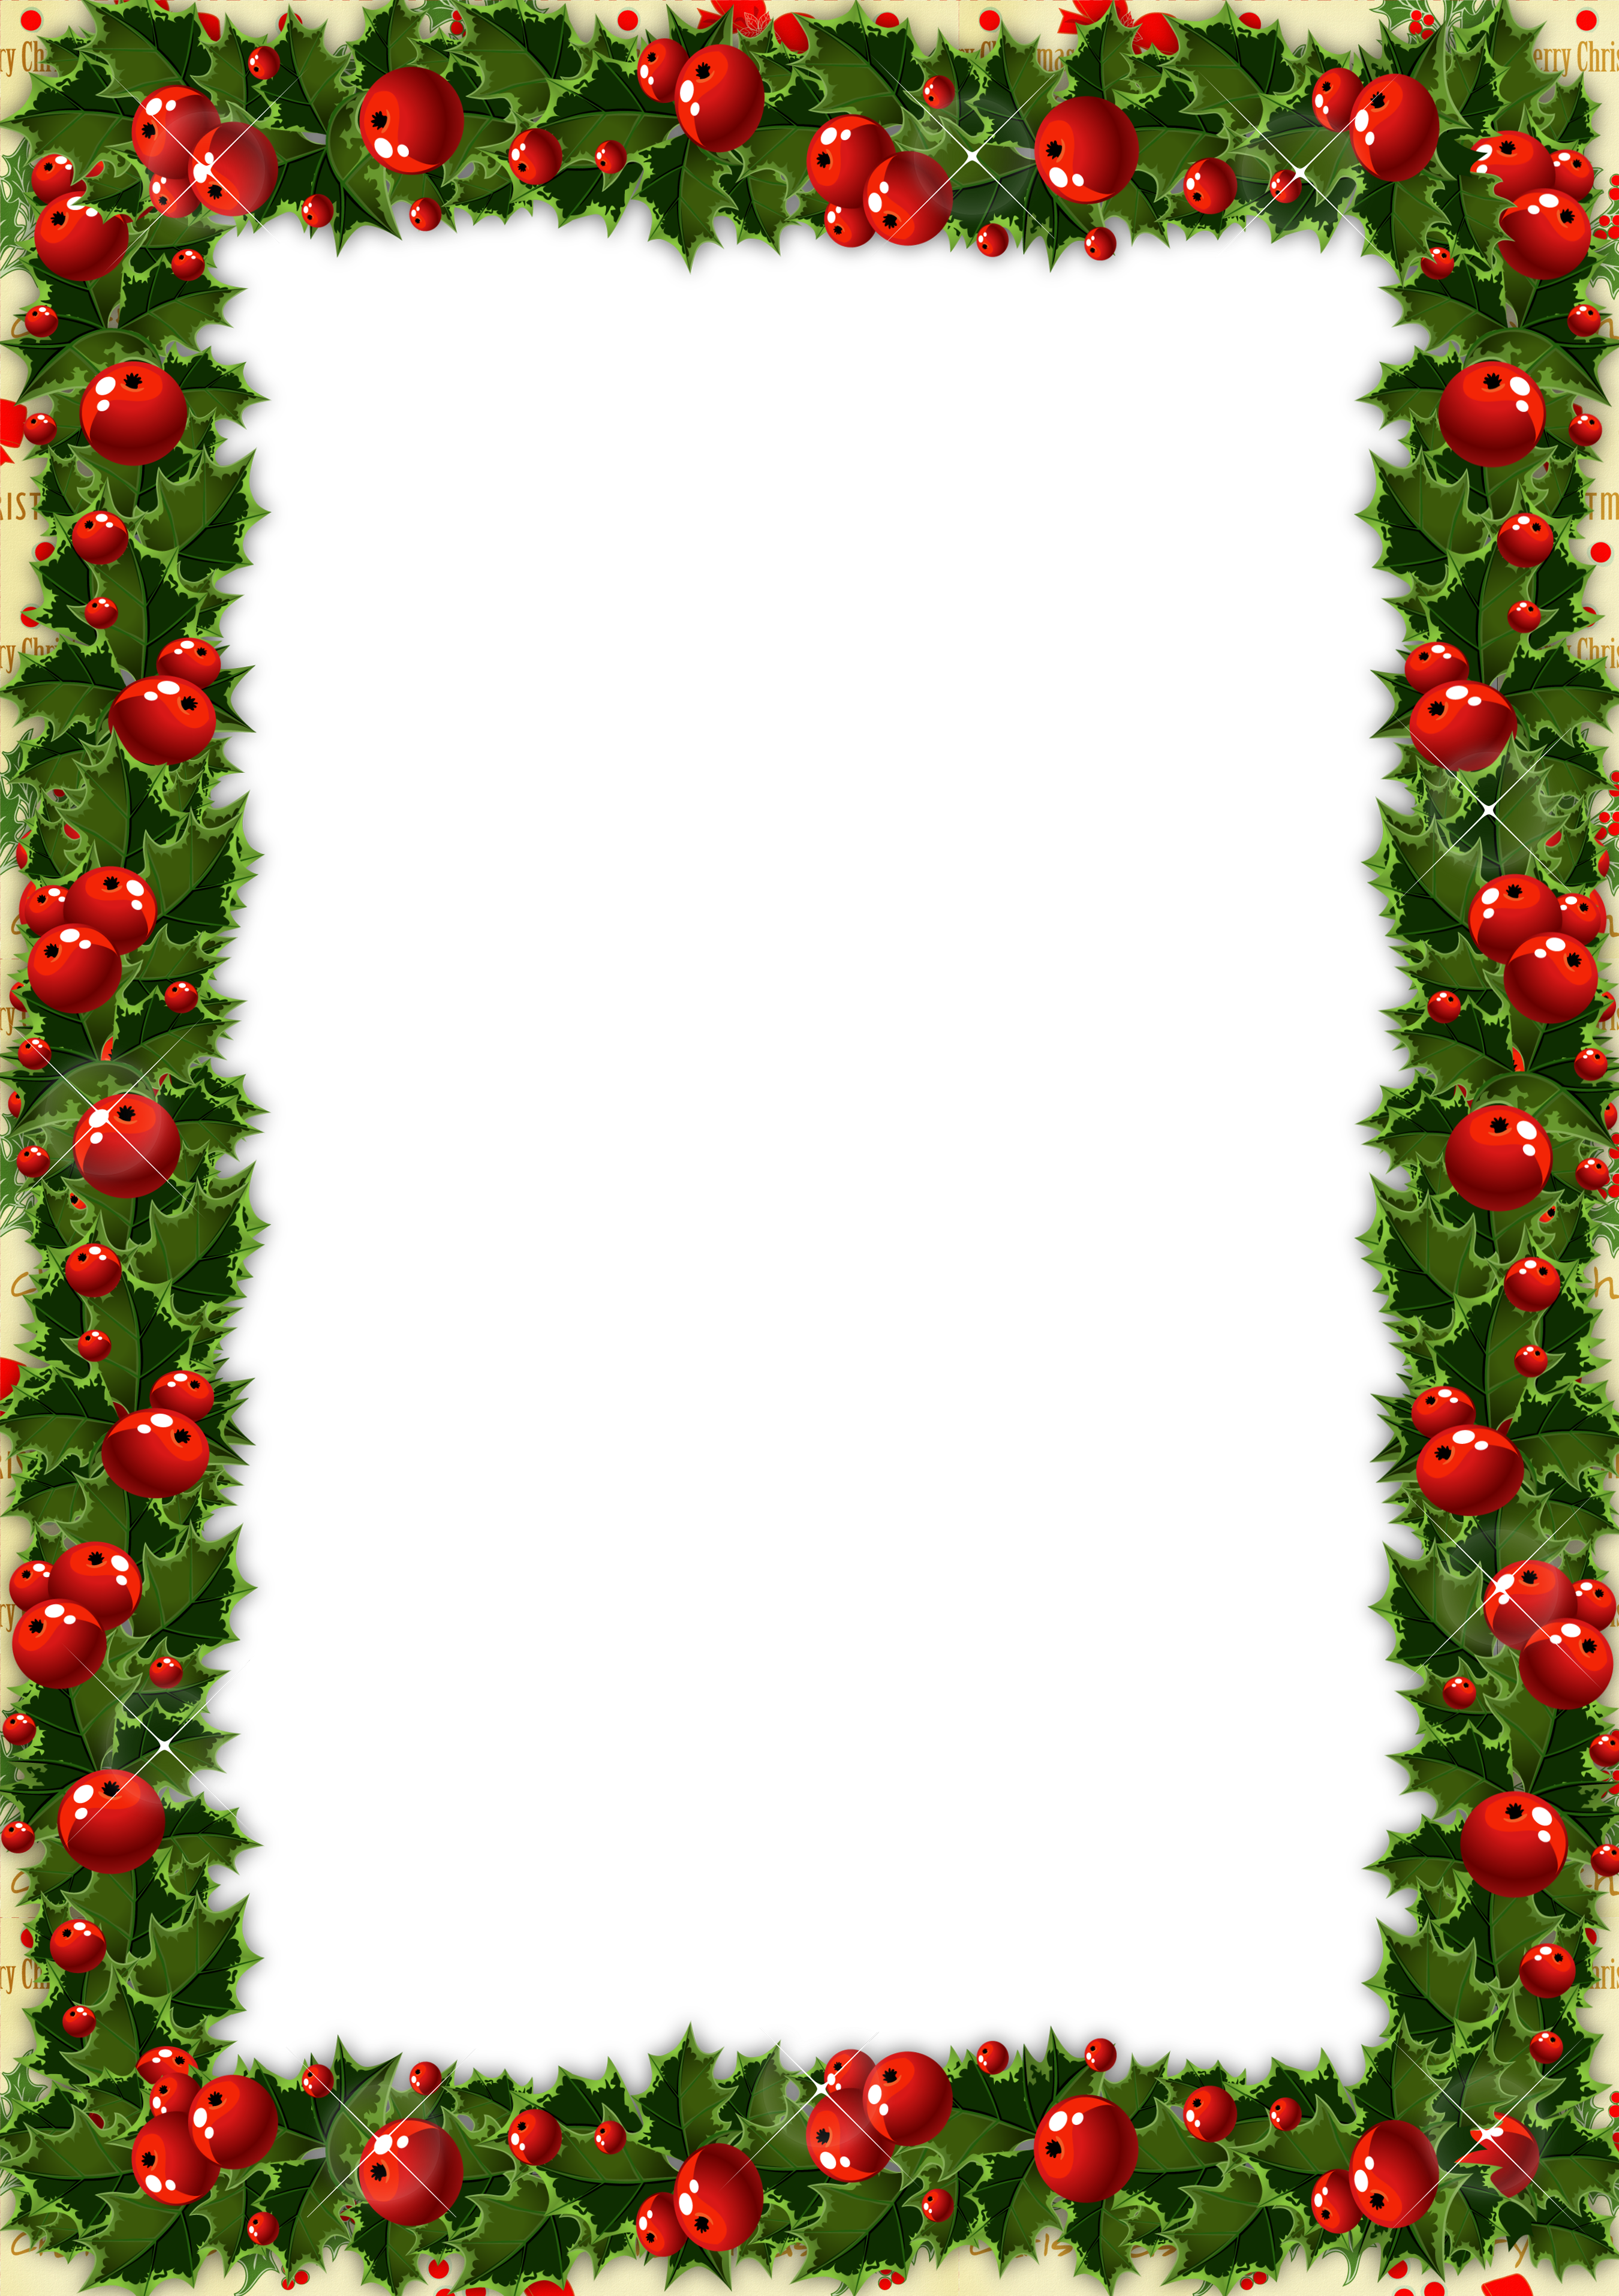 Transparent christmas photo with. Hands clipart frame